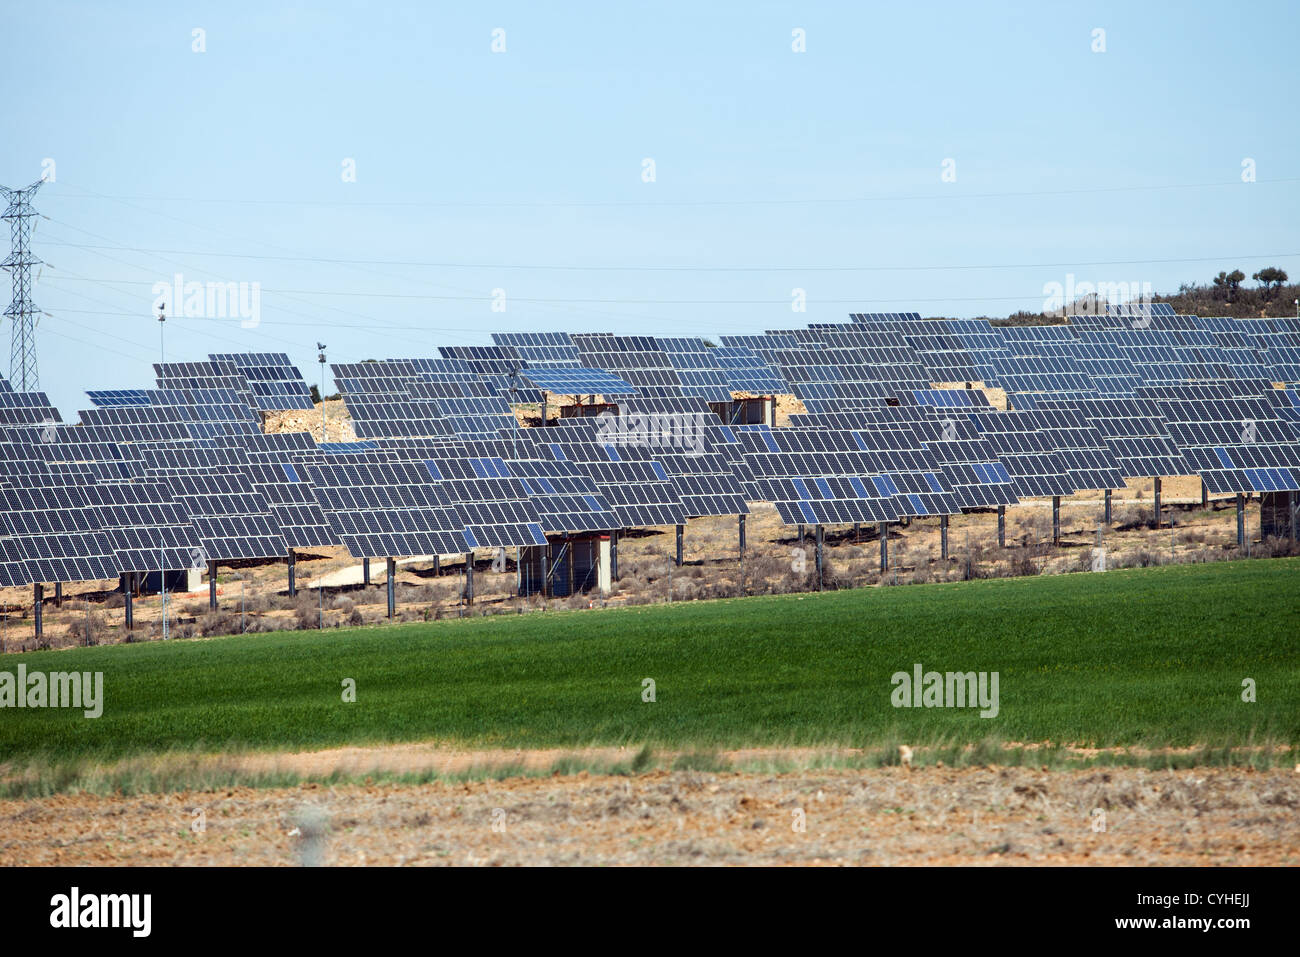 Massive solar farm generating electricity out of solar power Stock Photo